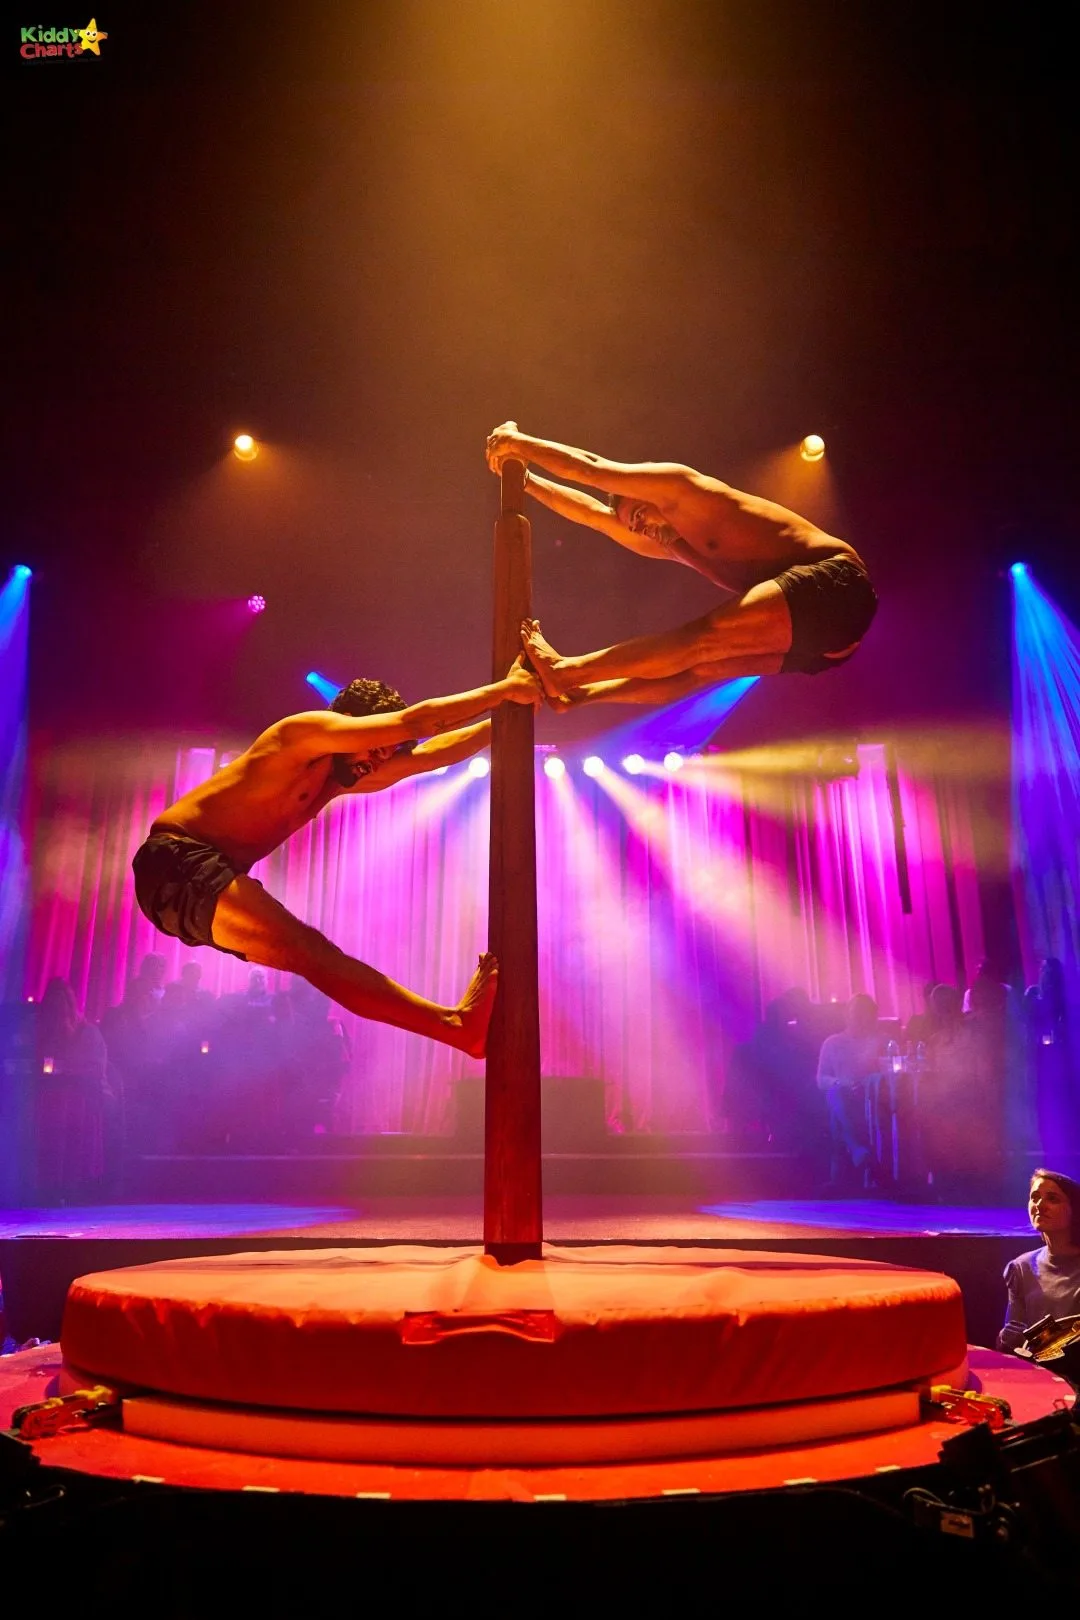 Some of the acrobats at Petite Soiree in London are just breath-taking.